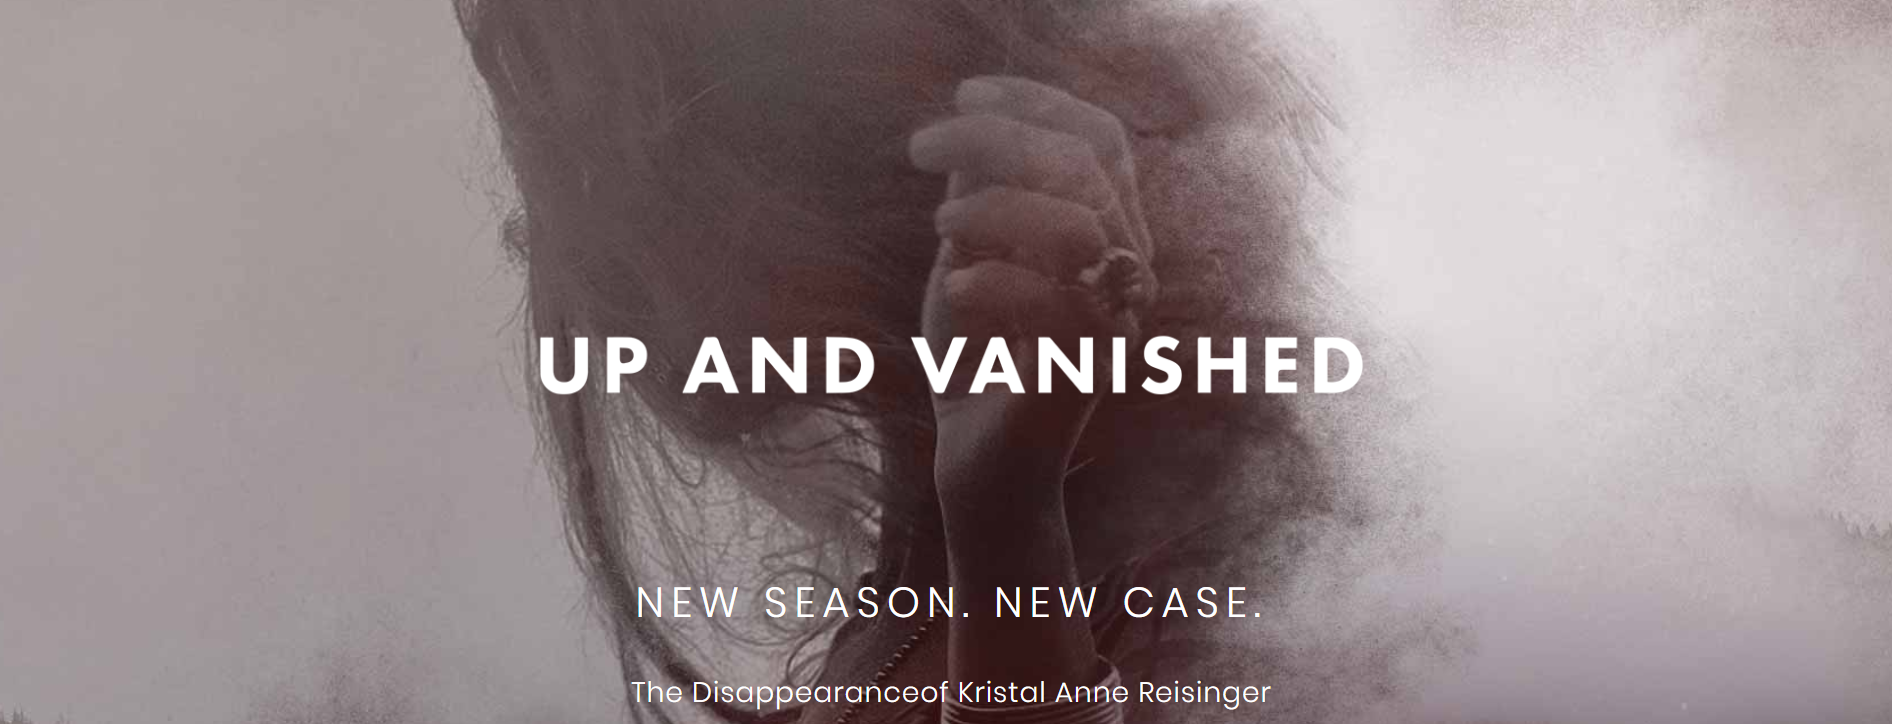 up and vanished season 3 characters